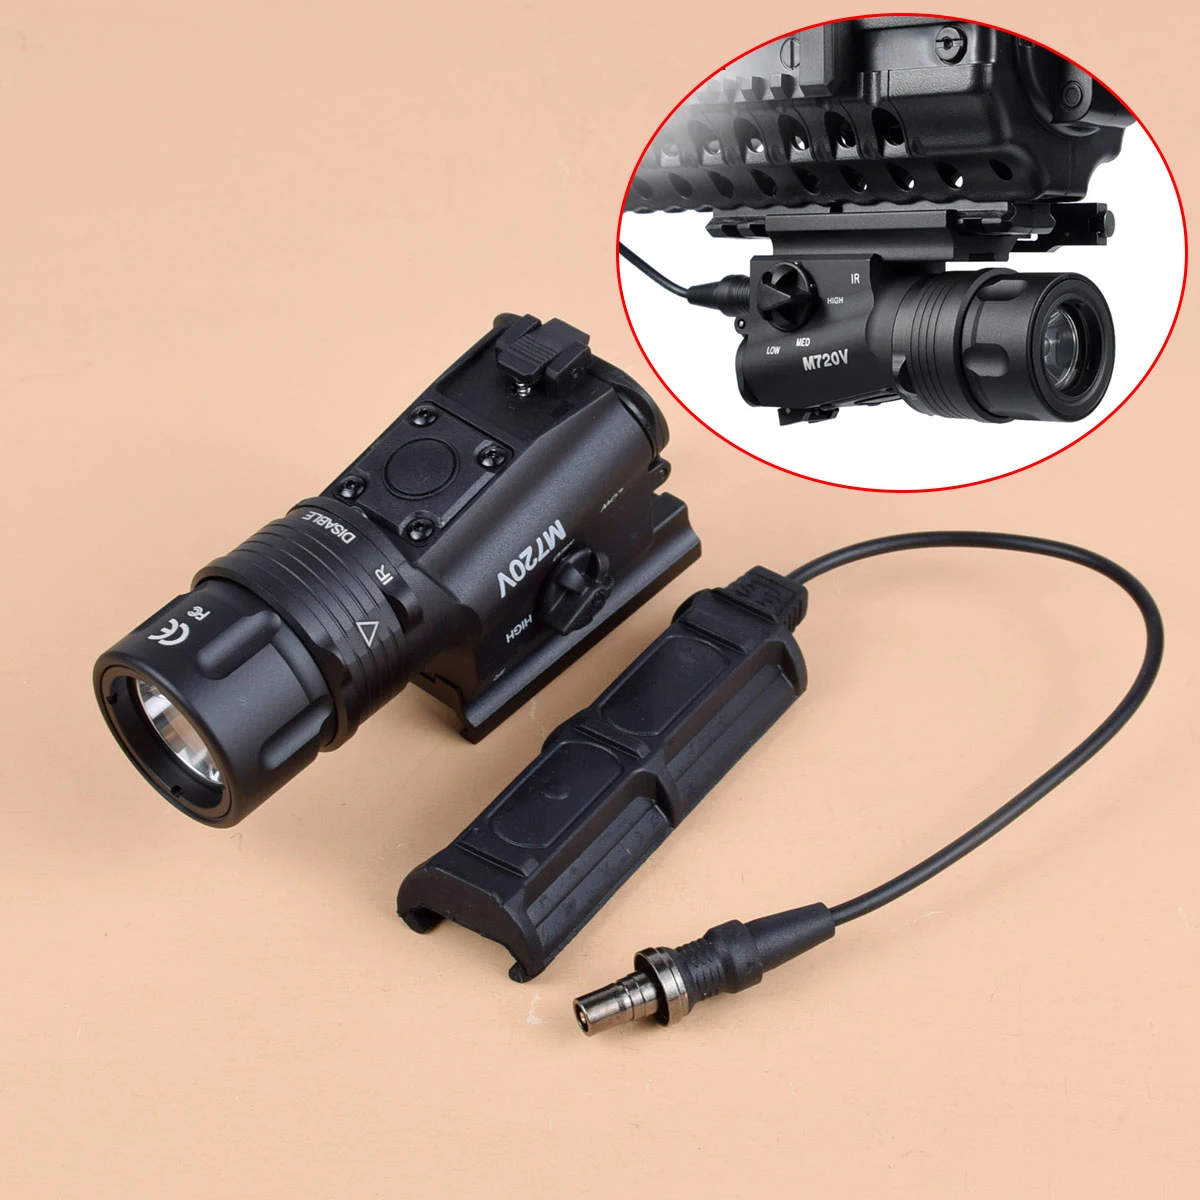 Tactical SF M720V Weapon Scout Strobe Light With M93 QD Mount 500 Lumens For Airsoft AR15 M16 Hunting Light Torch